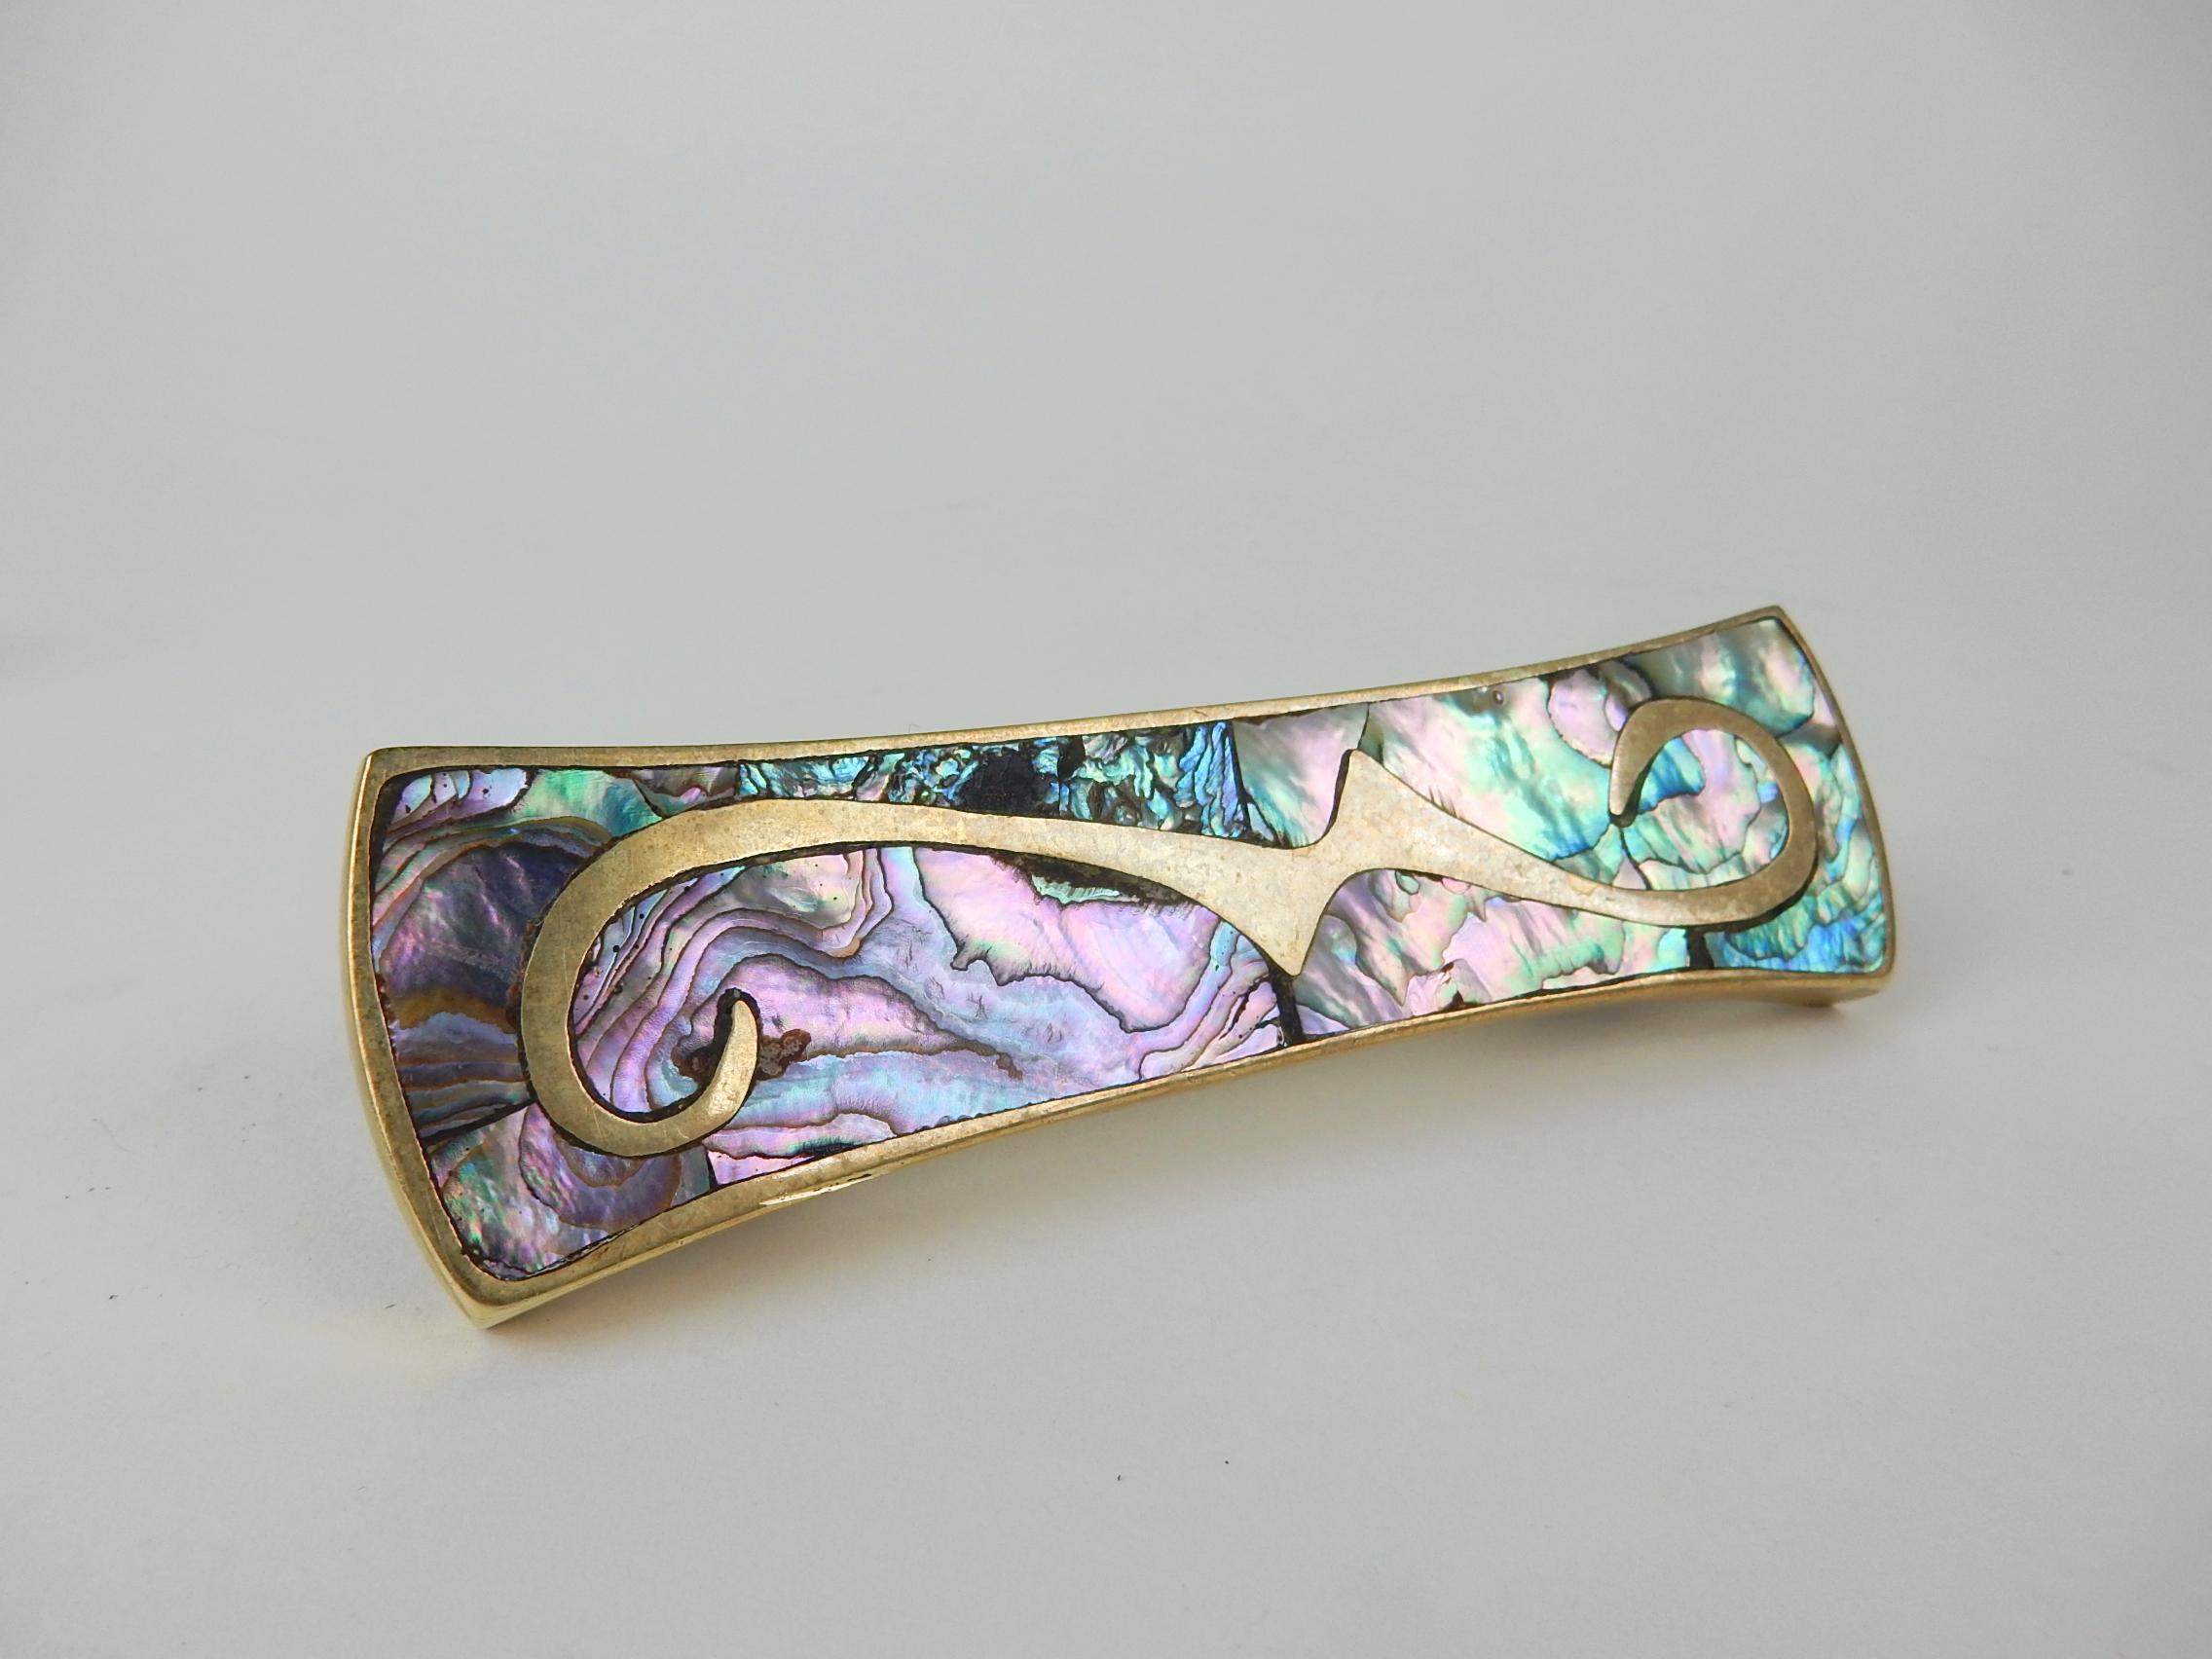 Gorgeous set of 4 1960s abalone and brass door or drawer pulls from Taxco Mexico
in the style of Pepe Mendonza.
These would be a phenomenal addition to a cabinet, screen or closet doors.
For reference holes are 3 inches across, center to